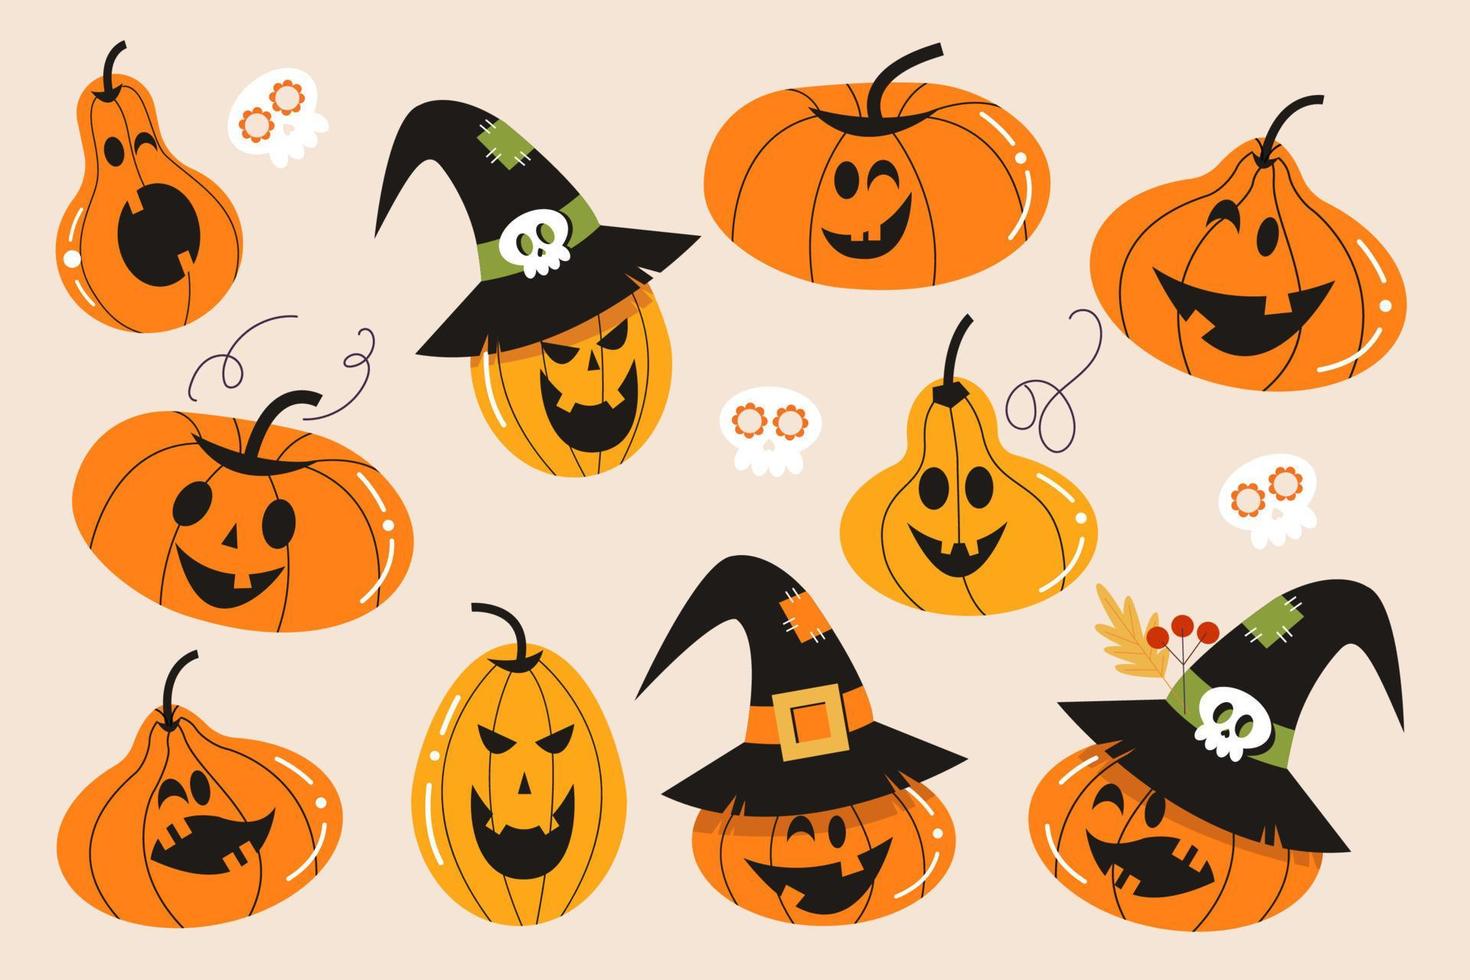 Happy Halloween. A set of orange and yellow scary and funny pumpkins. Vector illustration.